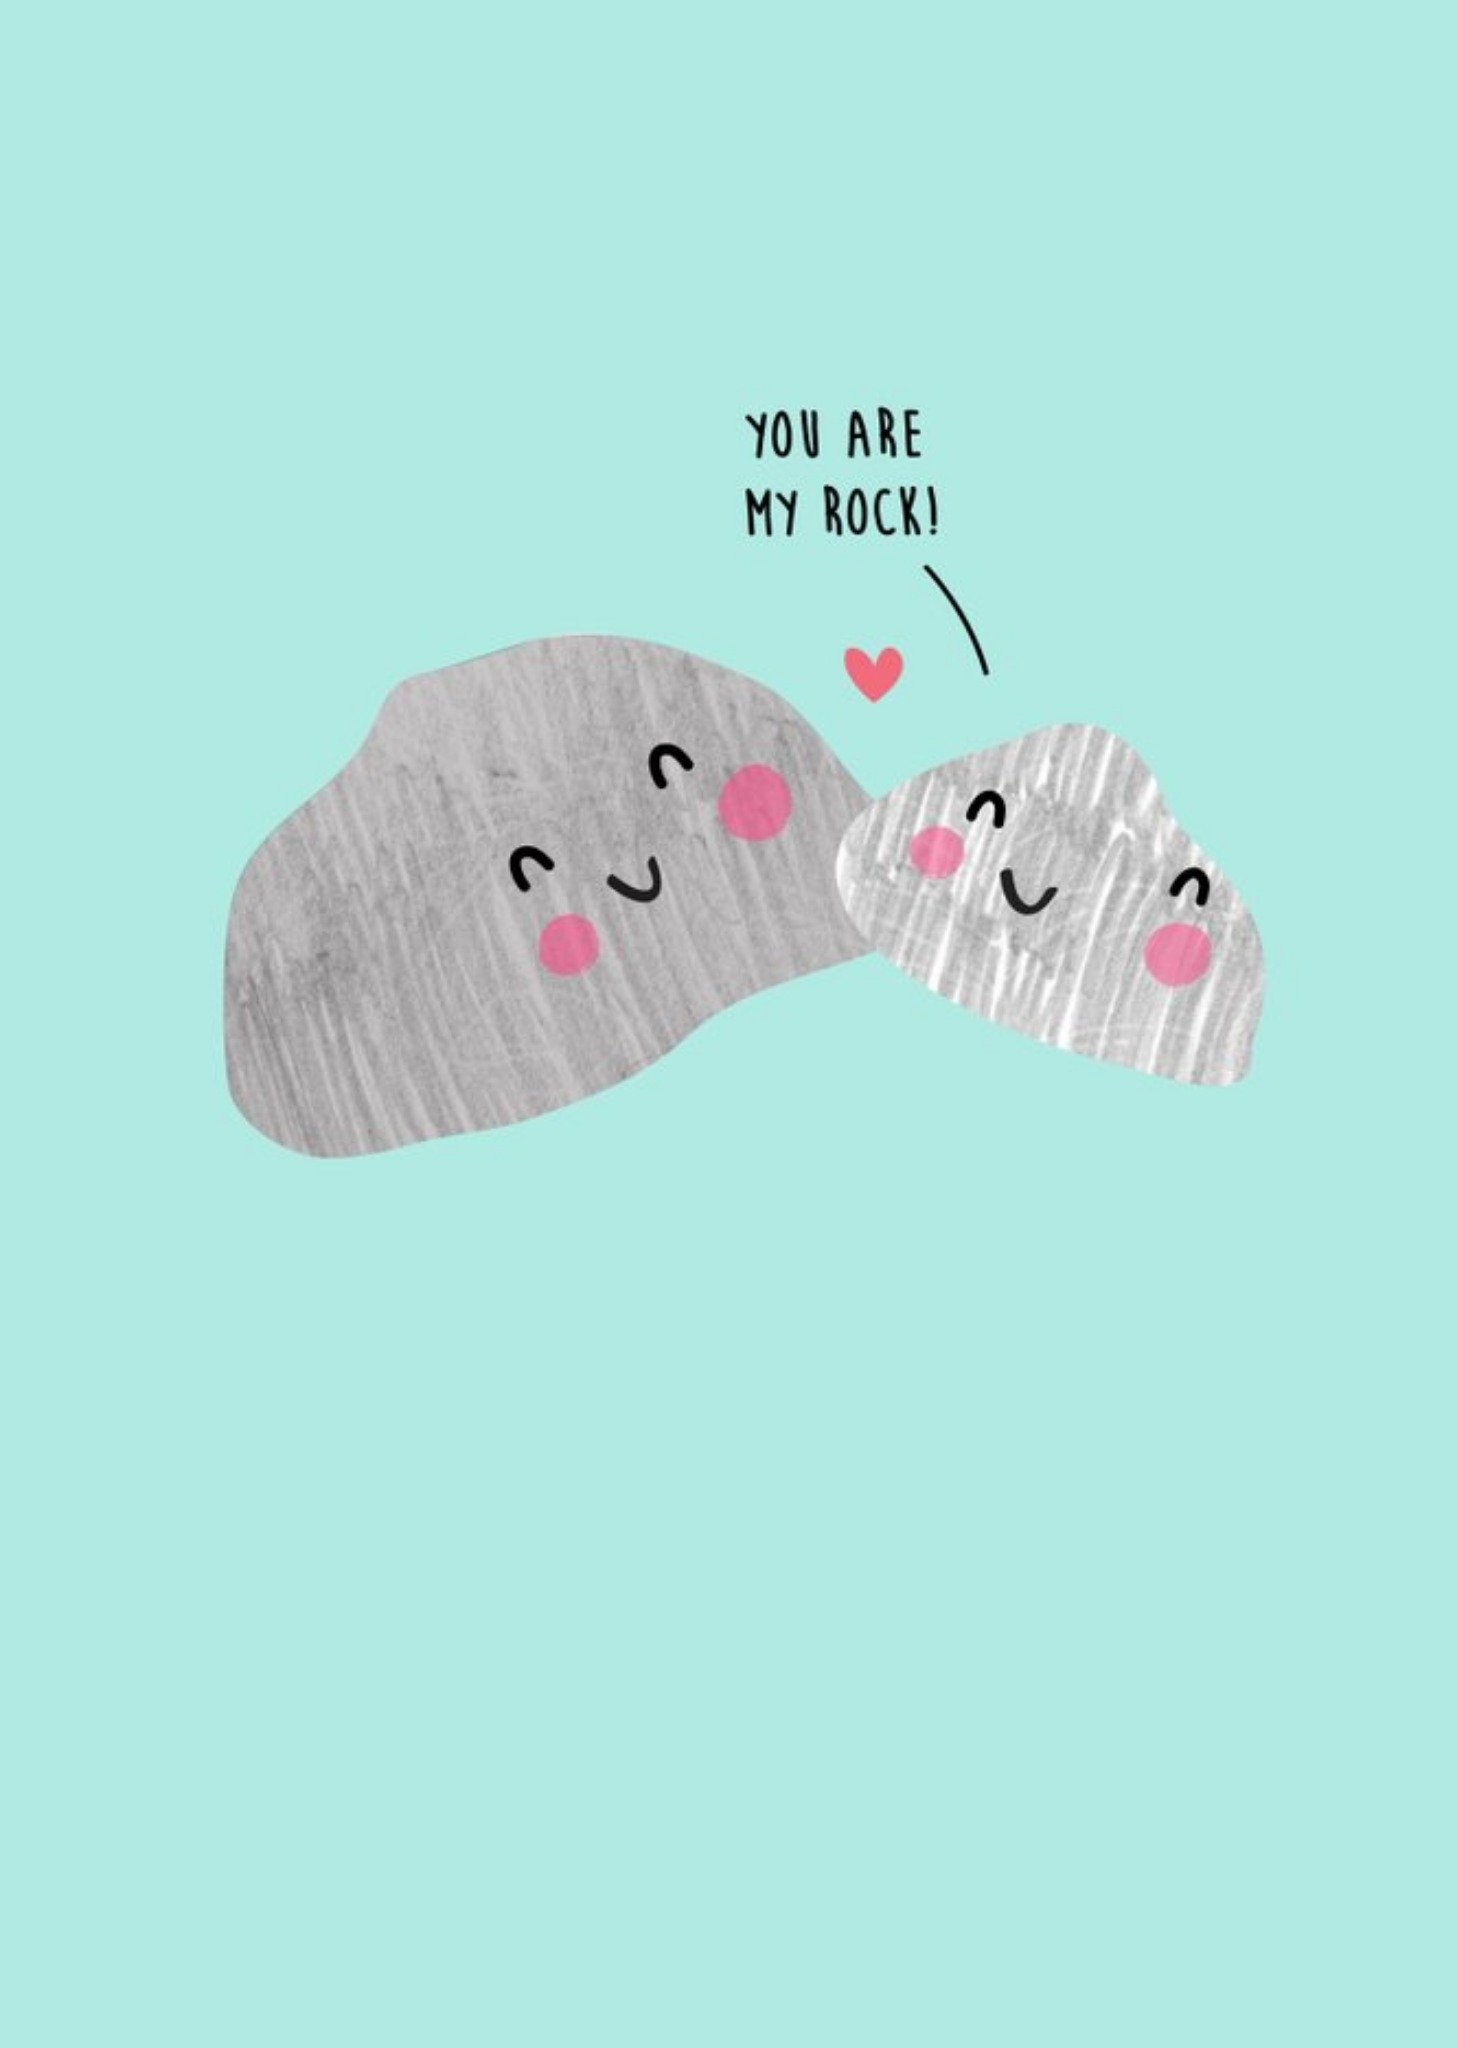 Moonpig Cute Illustrated You Are My Rock Valentine's Day Card Ecard